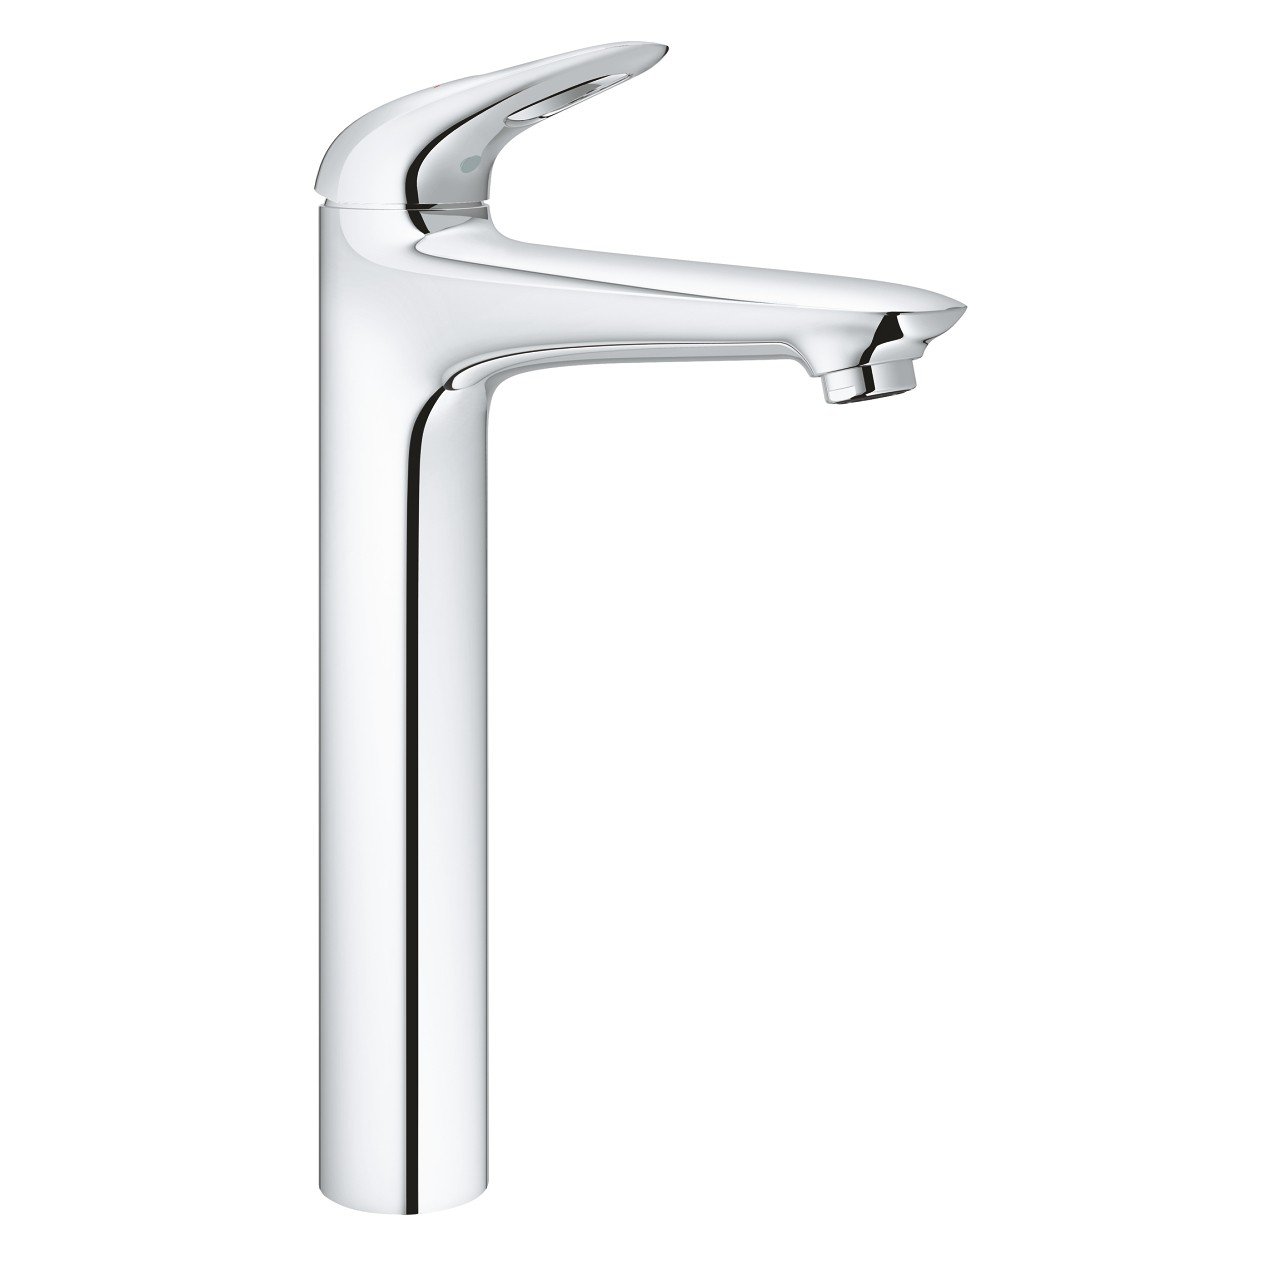 GROHE Mitigeur lavabo Taille XL Eurostyle 23570003 5